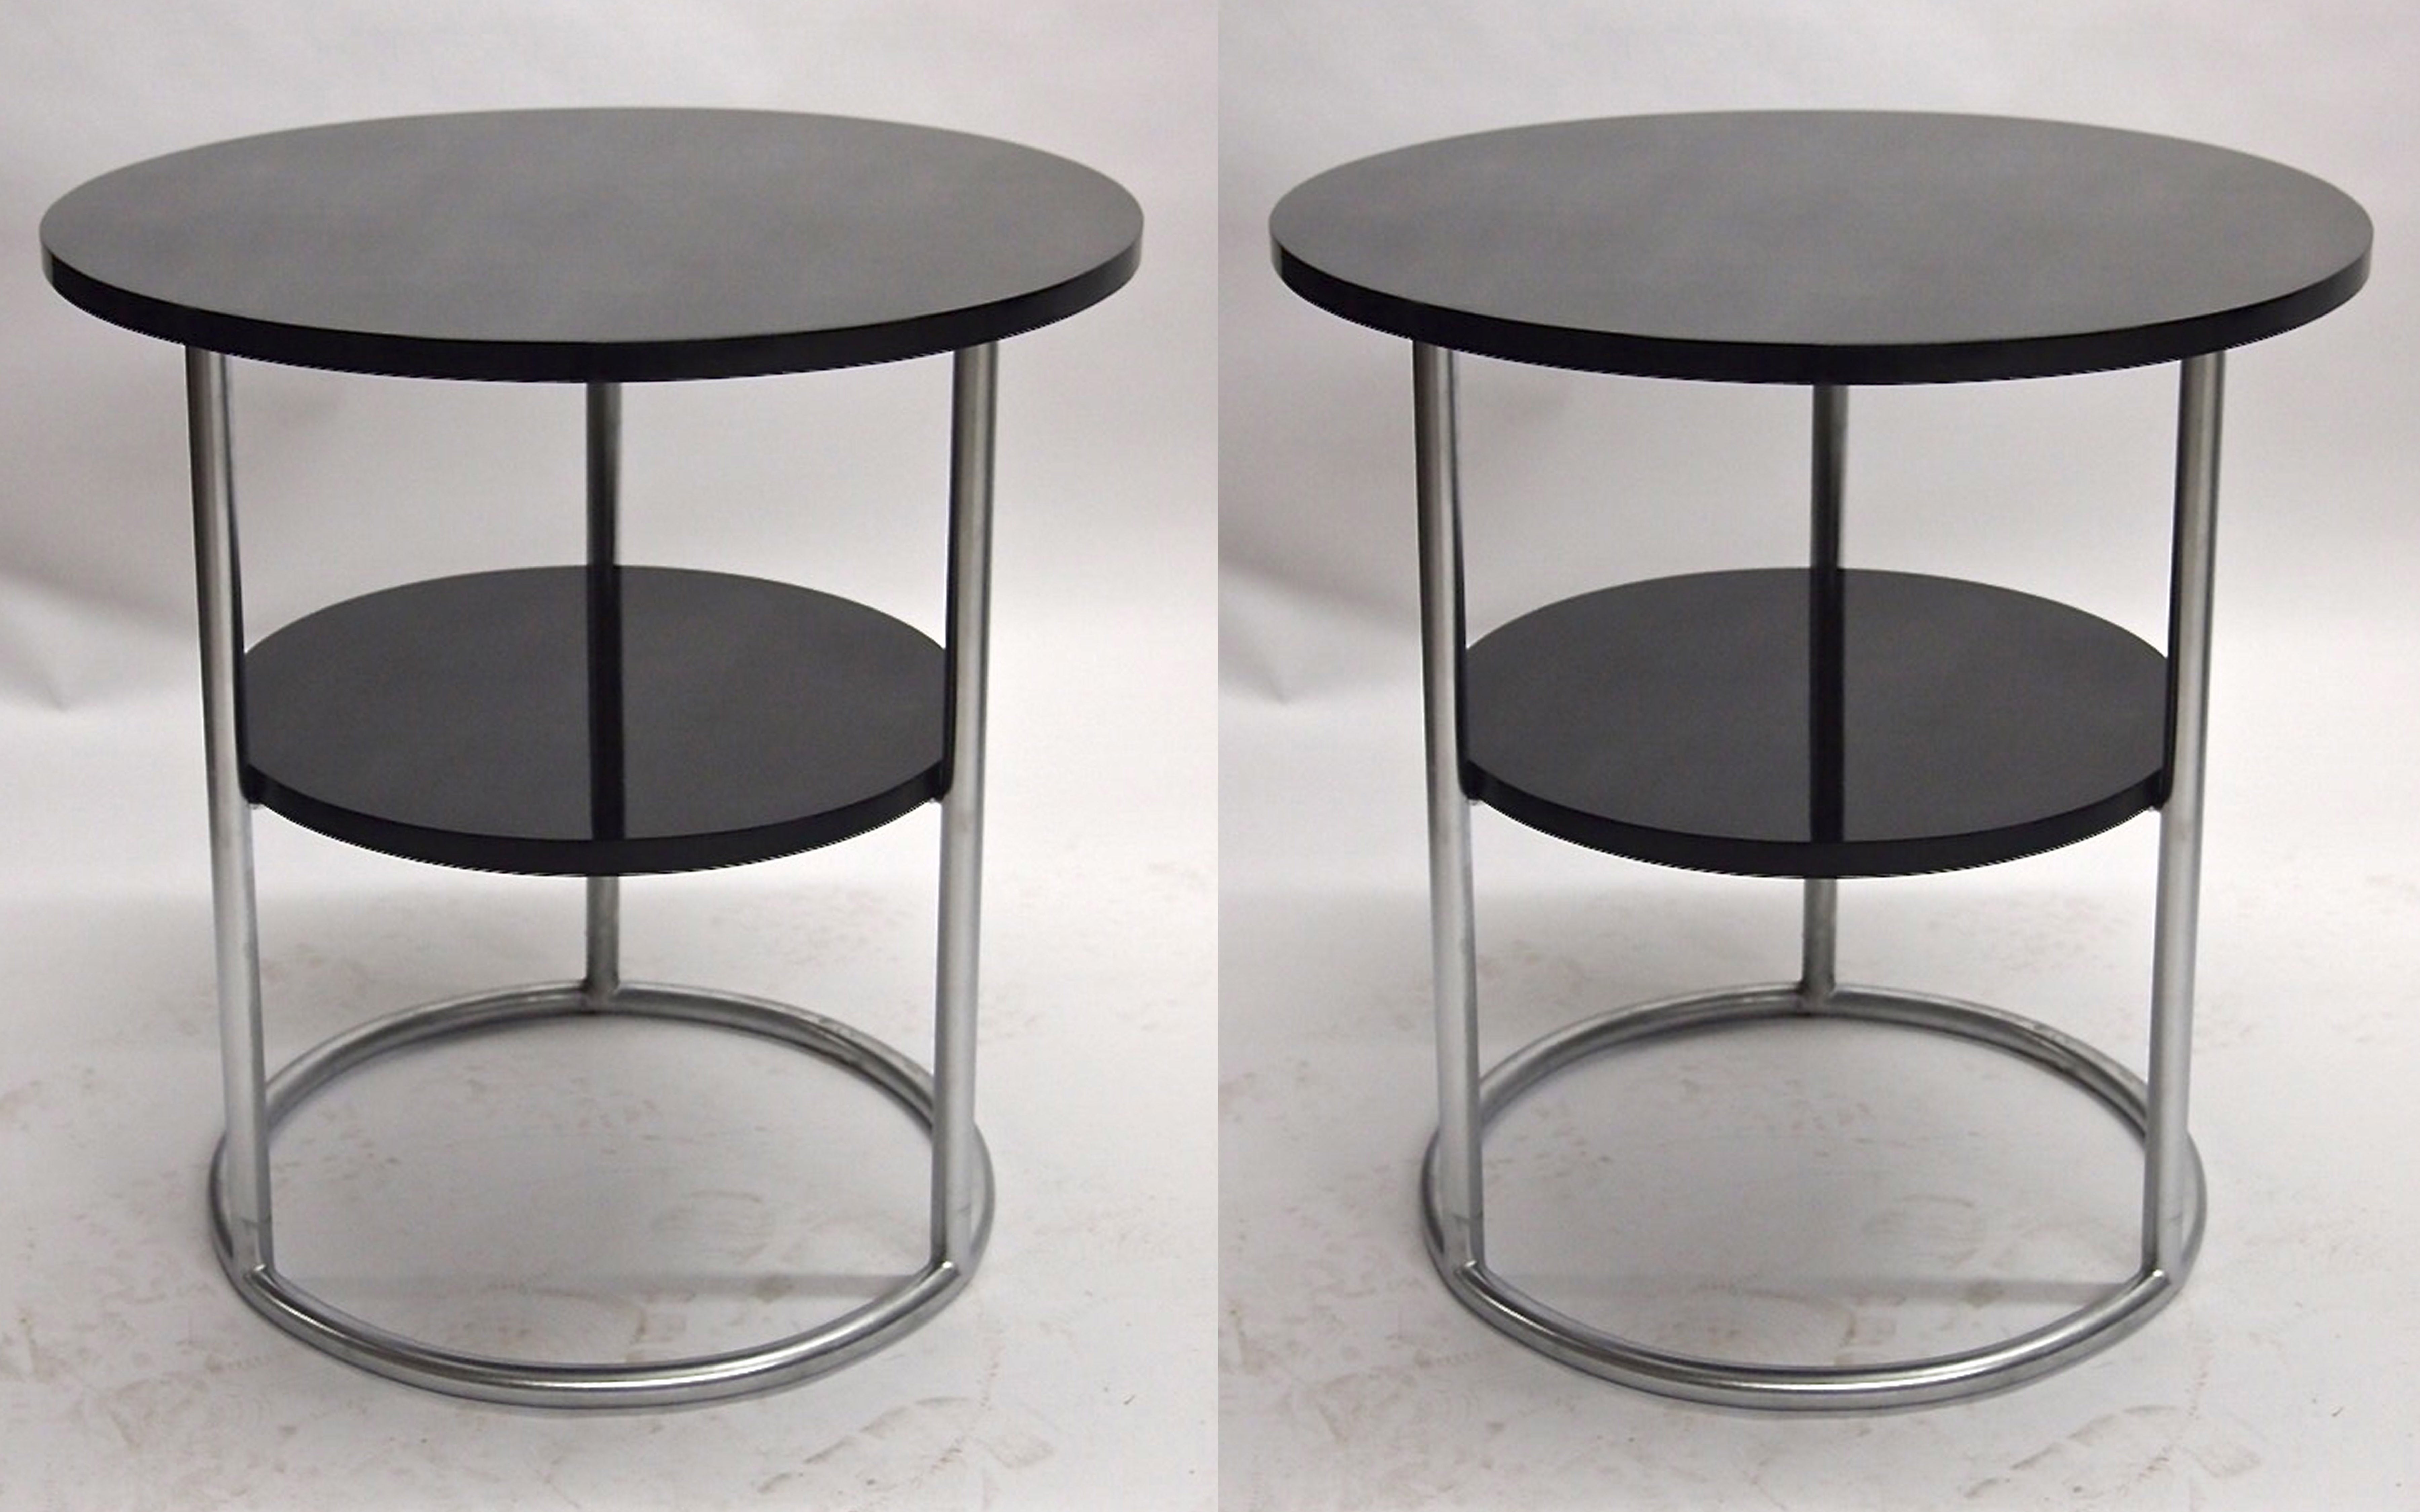 Pair of Side Tables Original Design 1930 by Thonet Made in USA, circa 1980